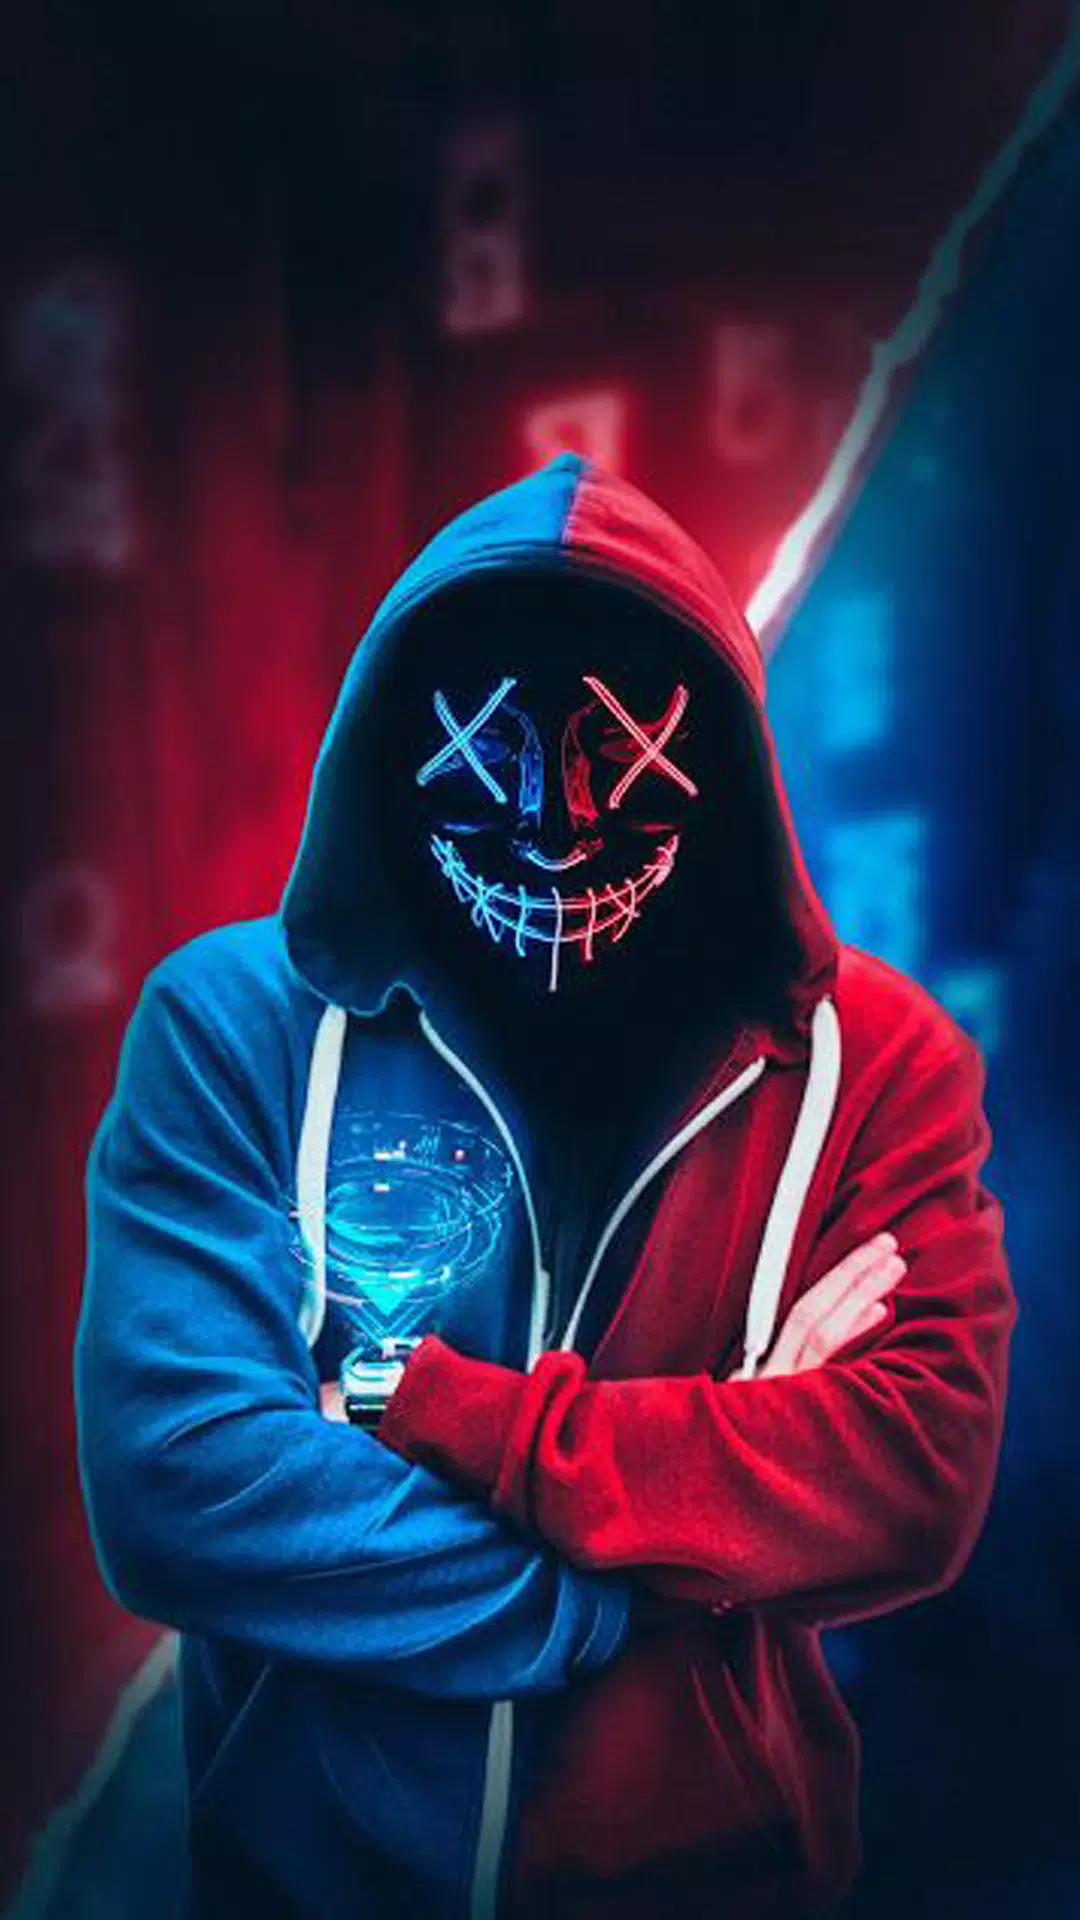 Led purge mask wallpaper hd fand dãcran apk for android download